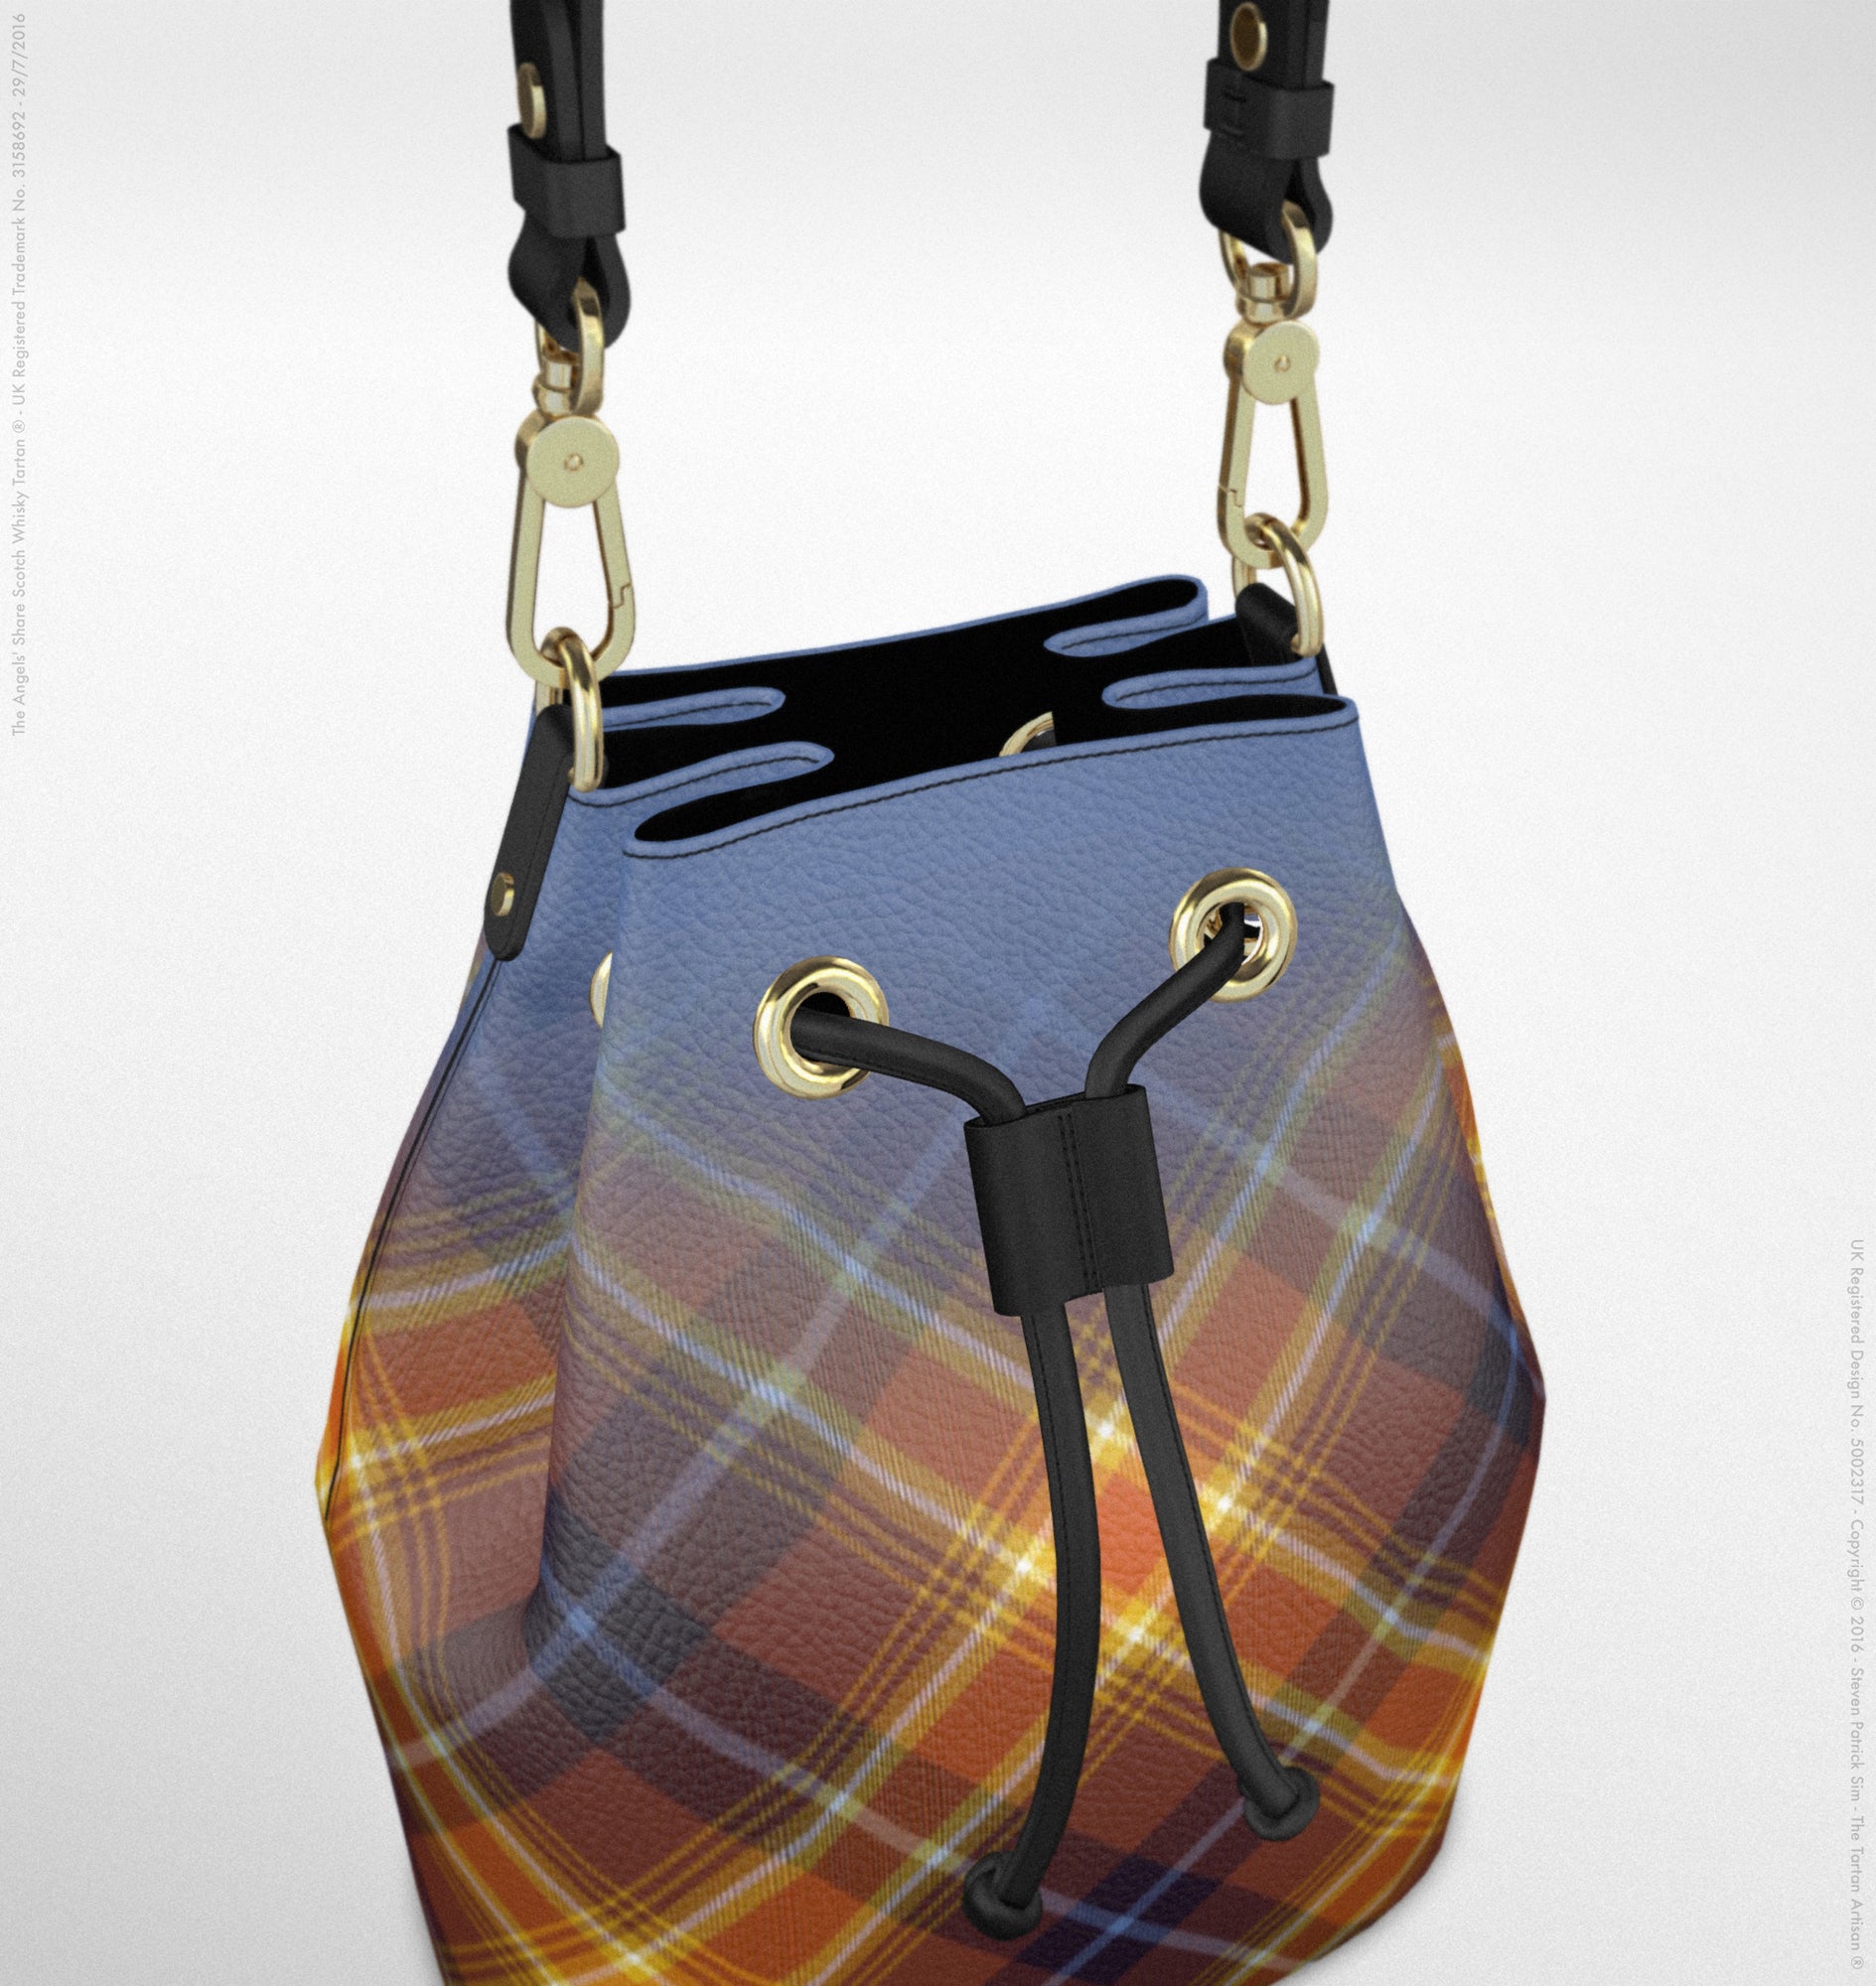 The Angels' Share Leather Bucket Designer Hand Bag - by Steven Patrick Sim, the Tartan Artisan - Made in the UK